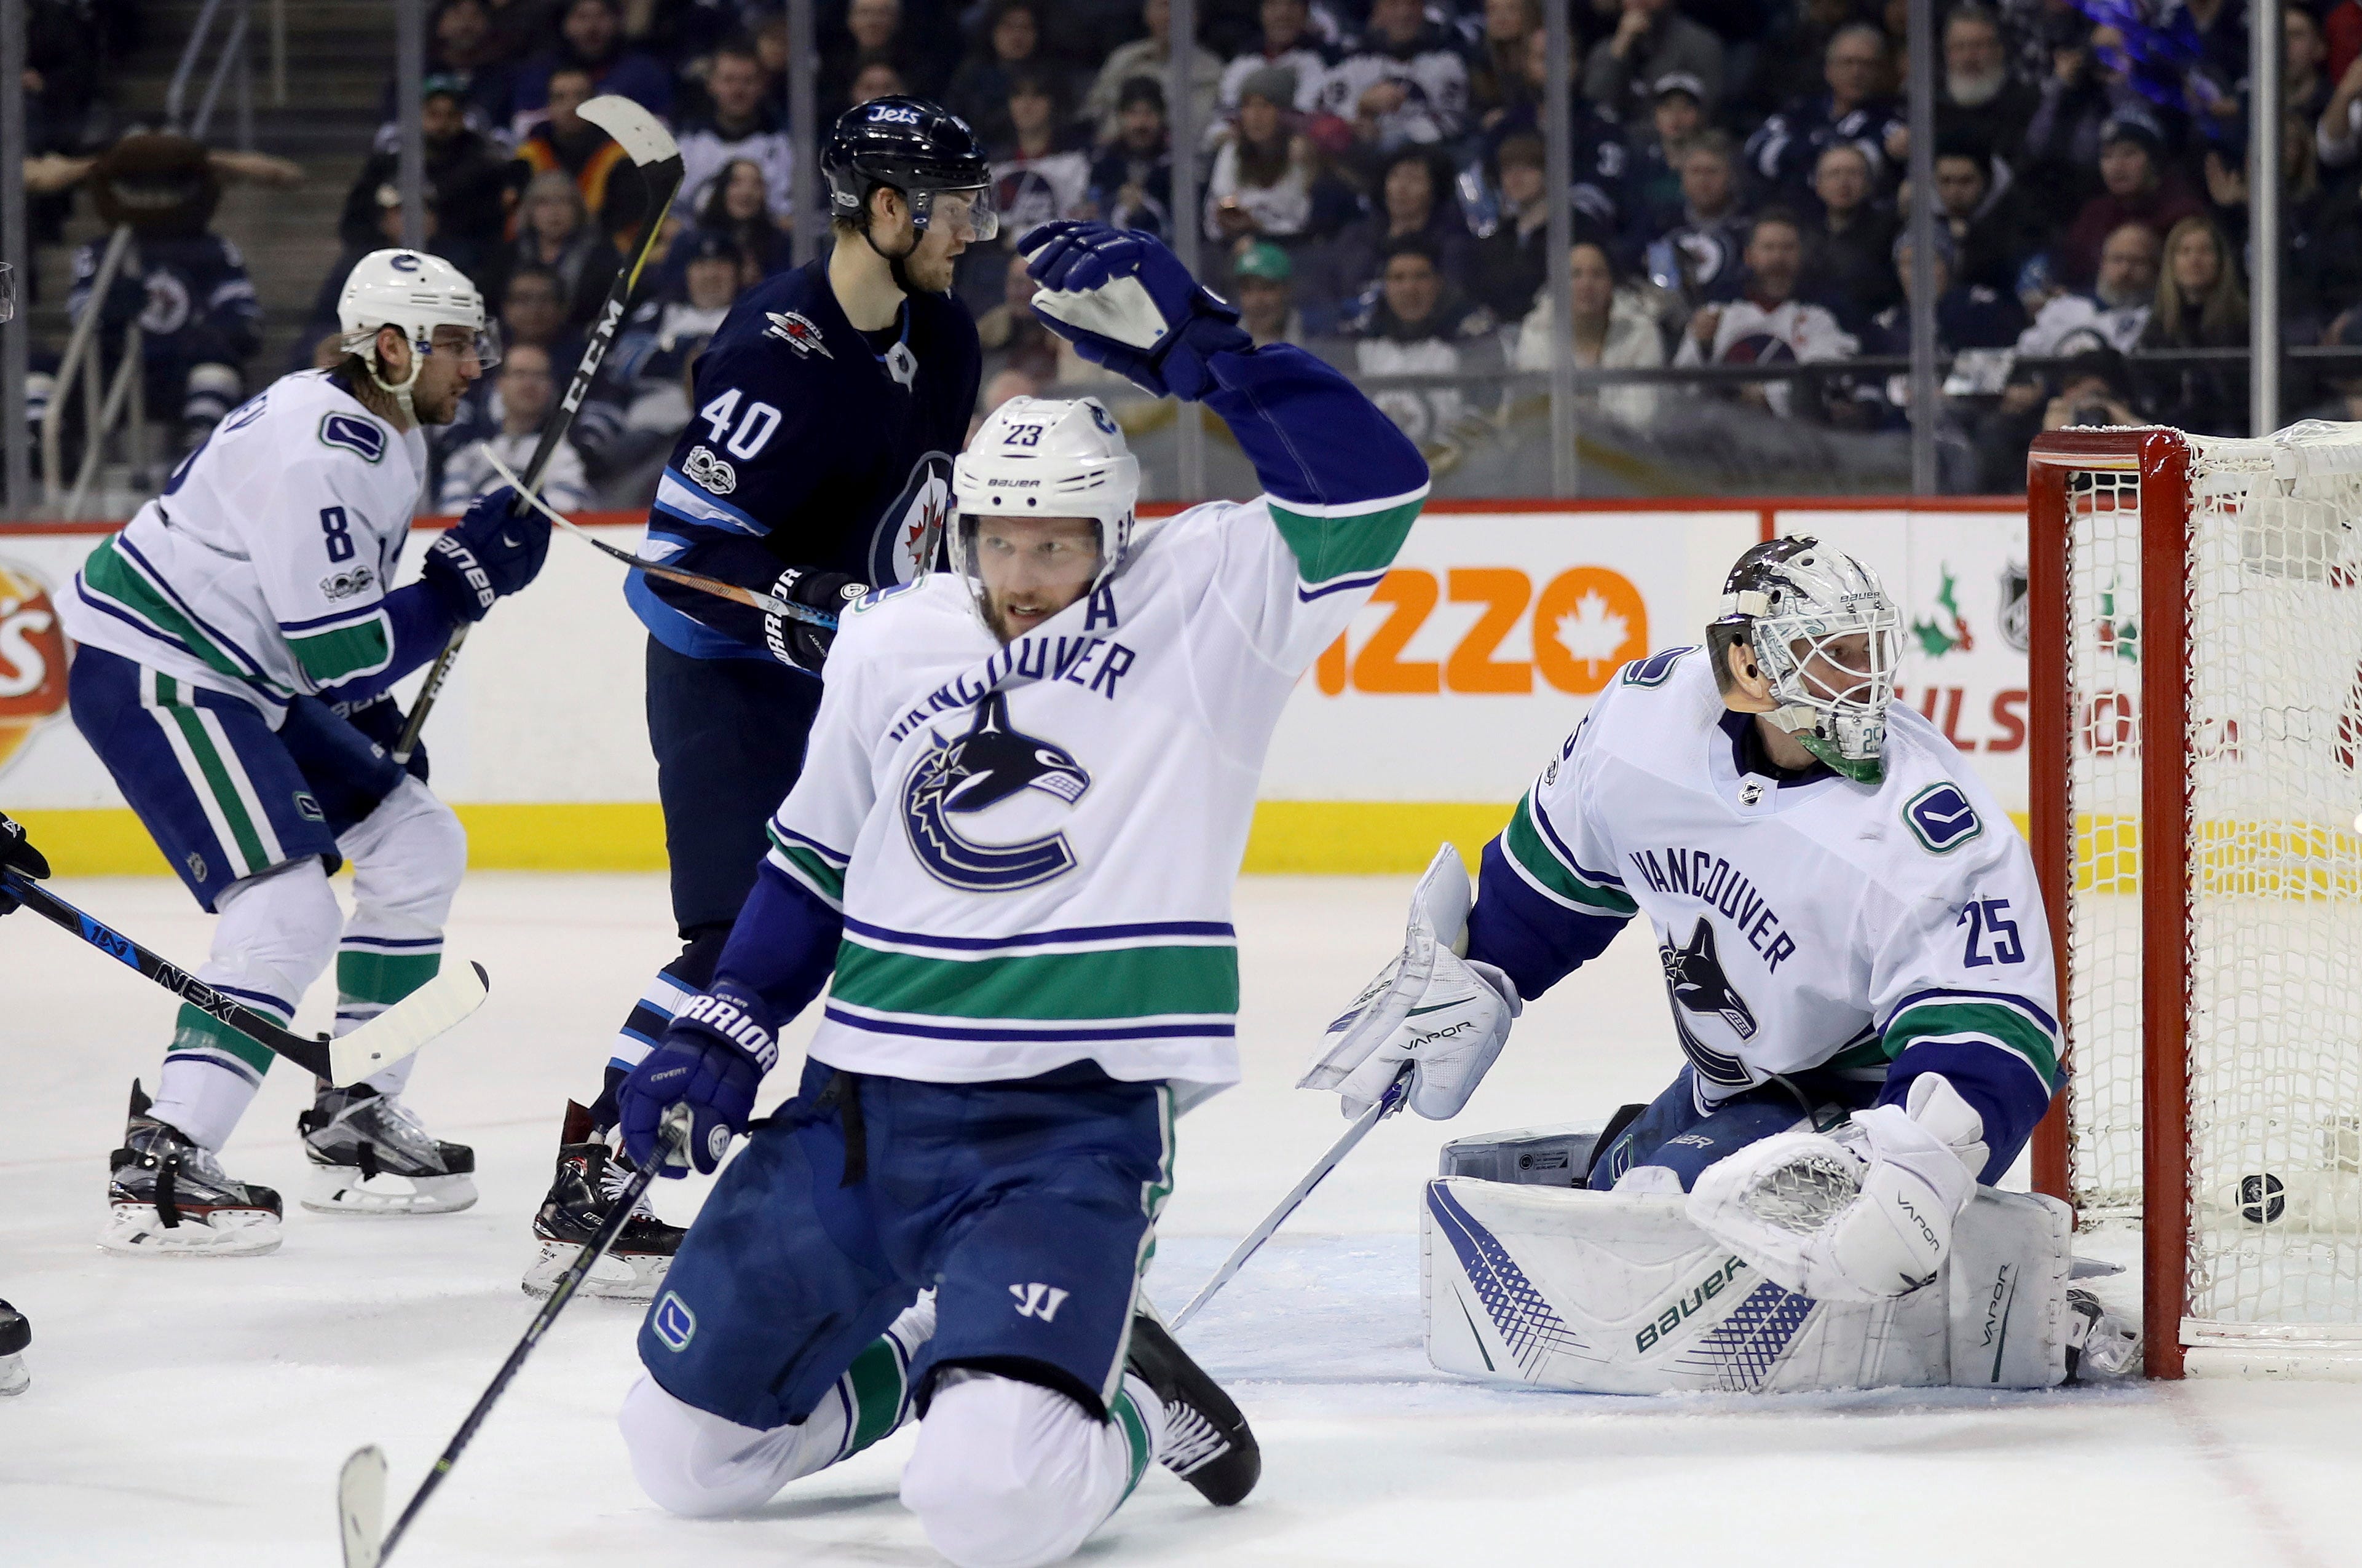 Perreault scores 2, Jets end skid with 5-1 win over Canucks